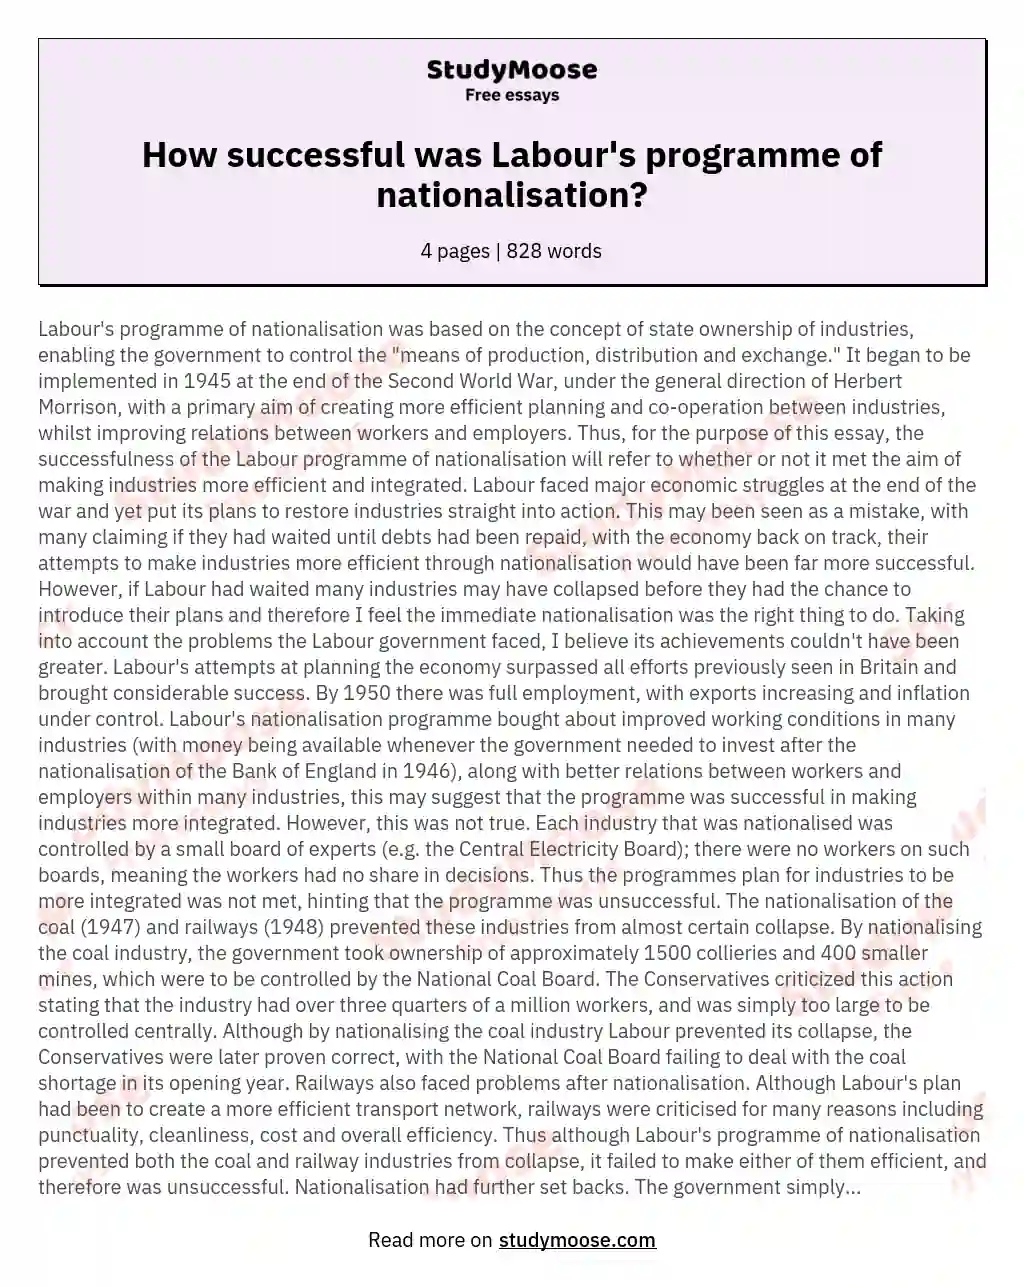 How successful was Labour's programme of nationalisation? essay